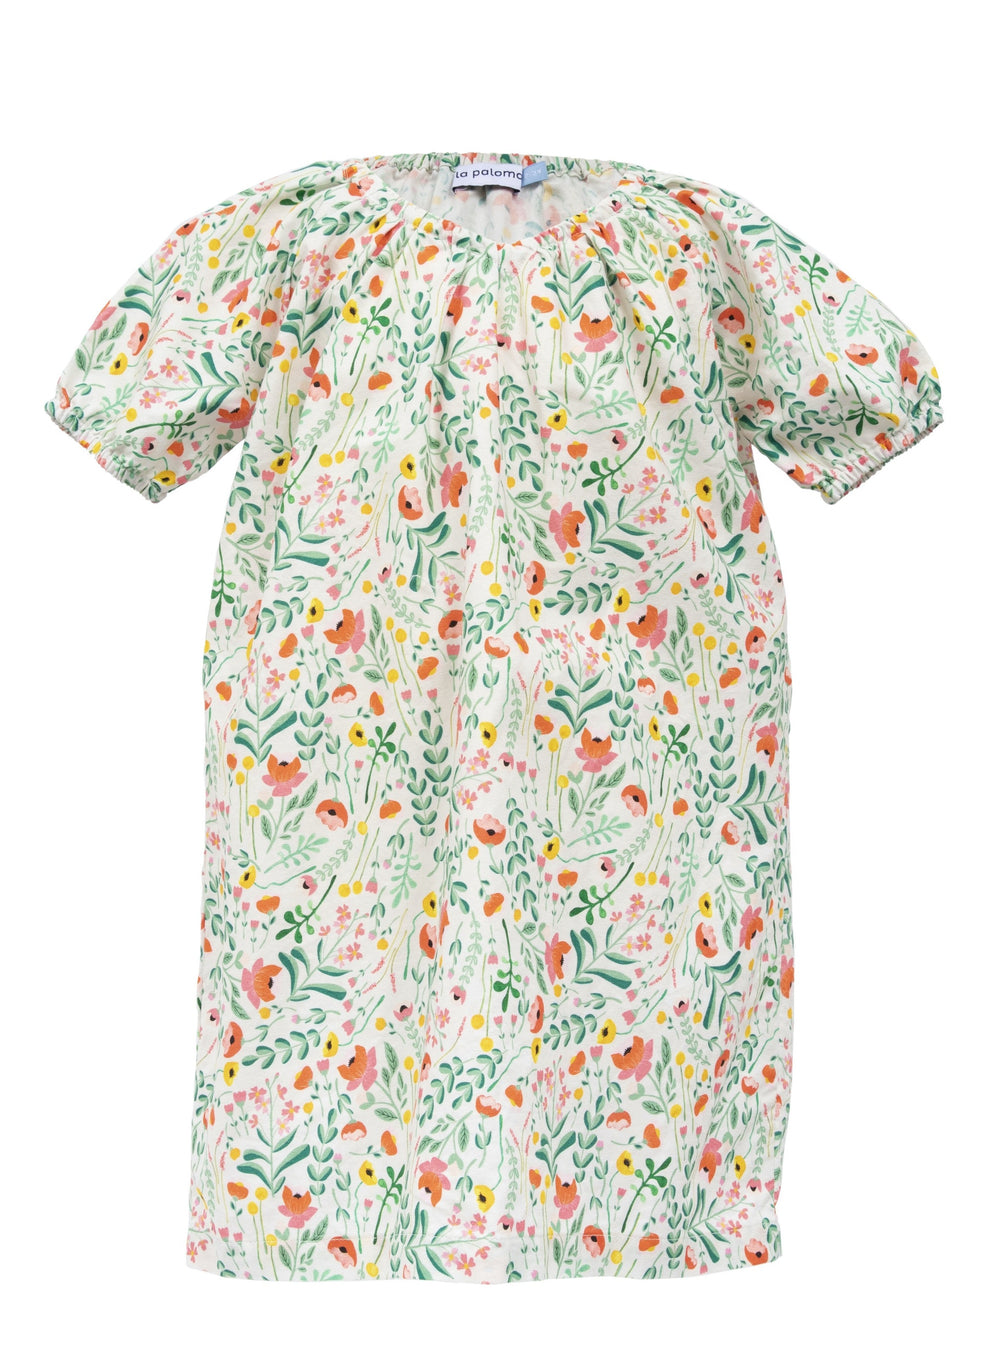 Girls' Parker House Dress in Lily Floral